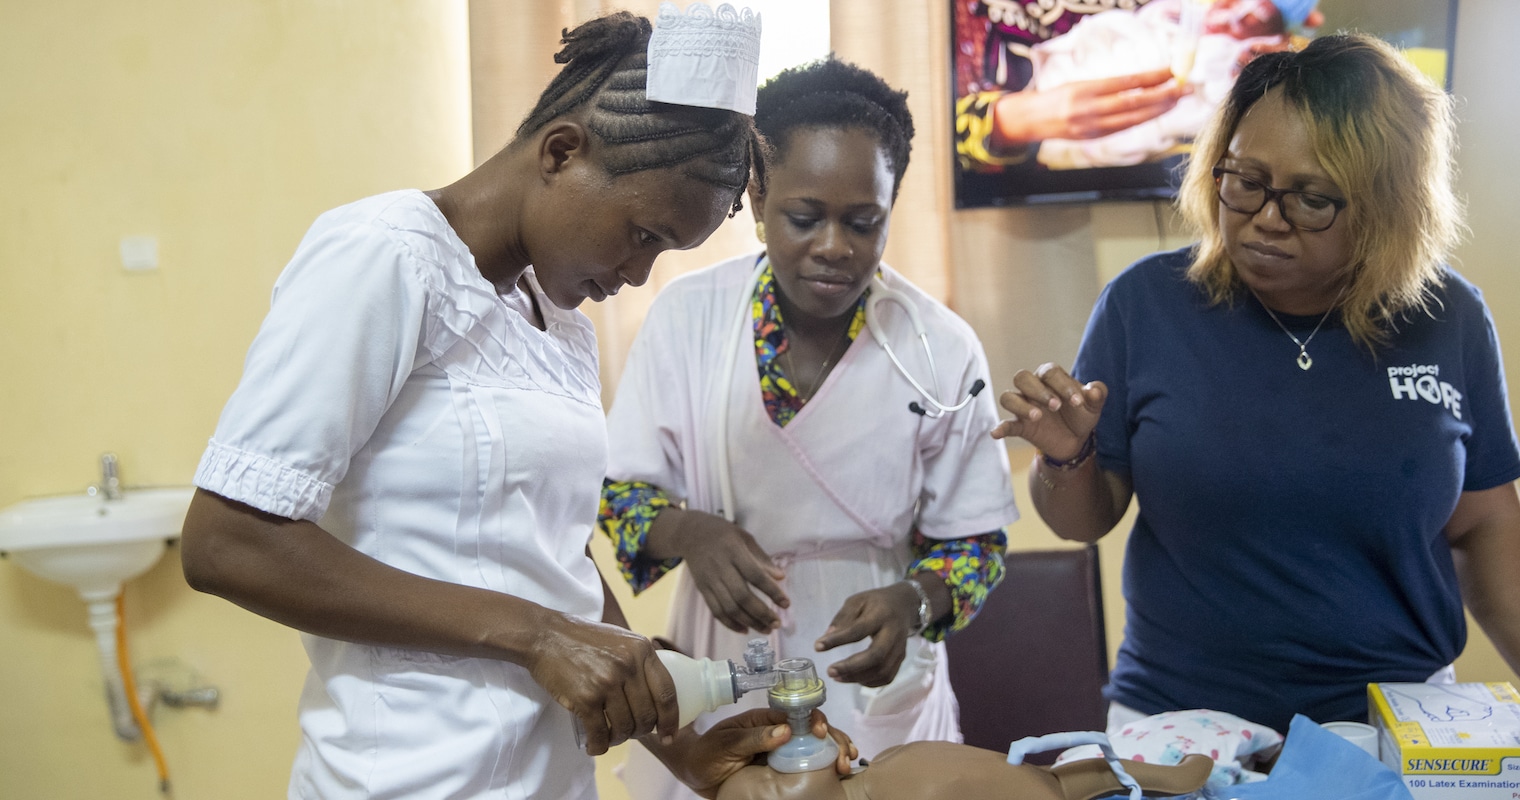 Two nurses in Sierra Leone learning how to care for child.